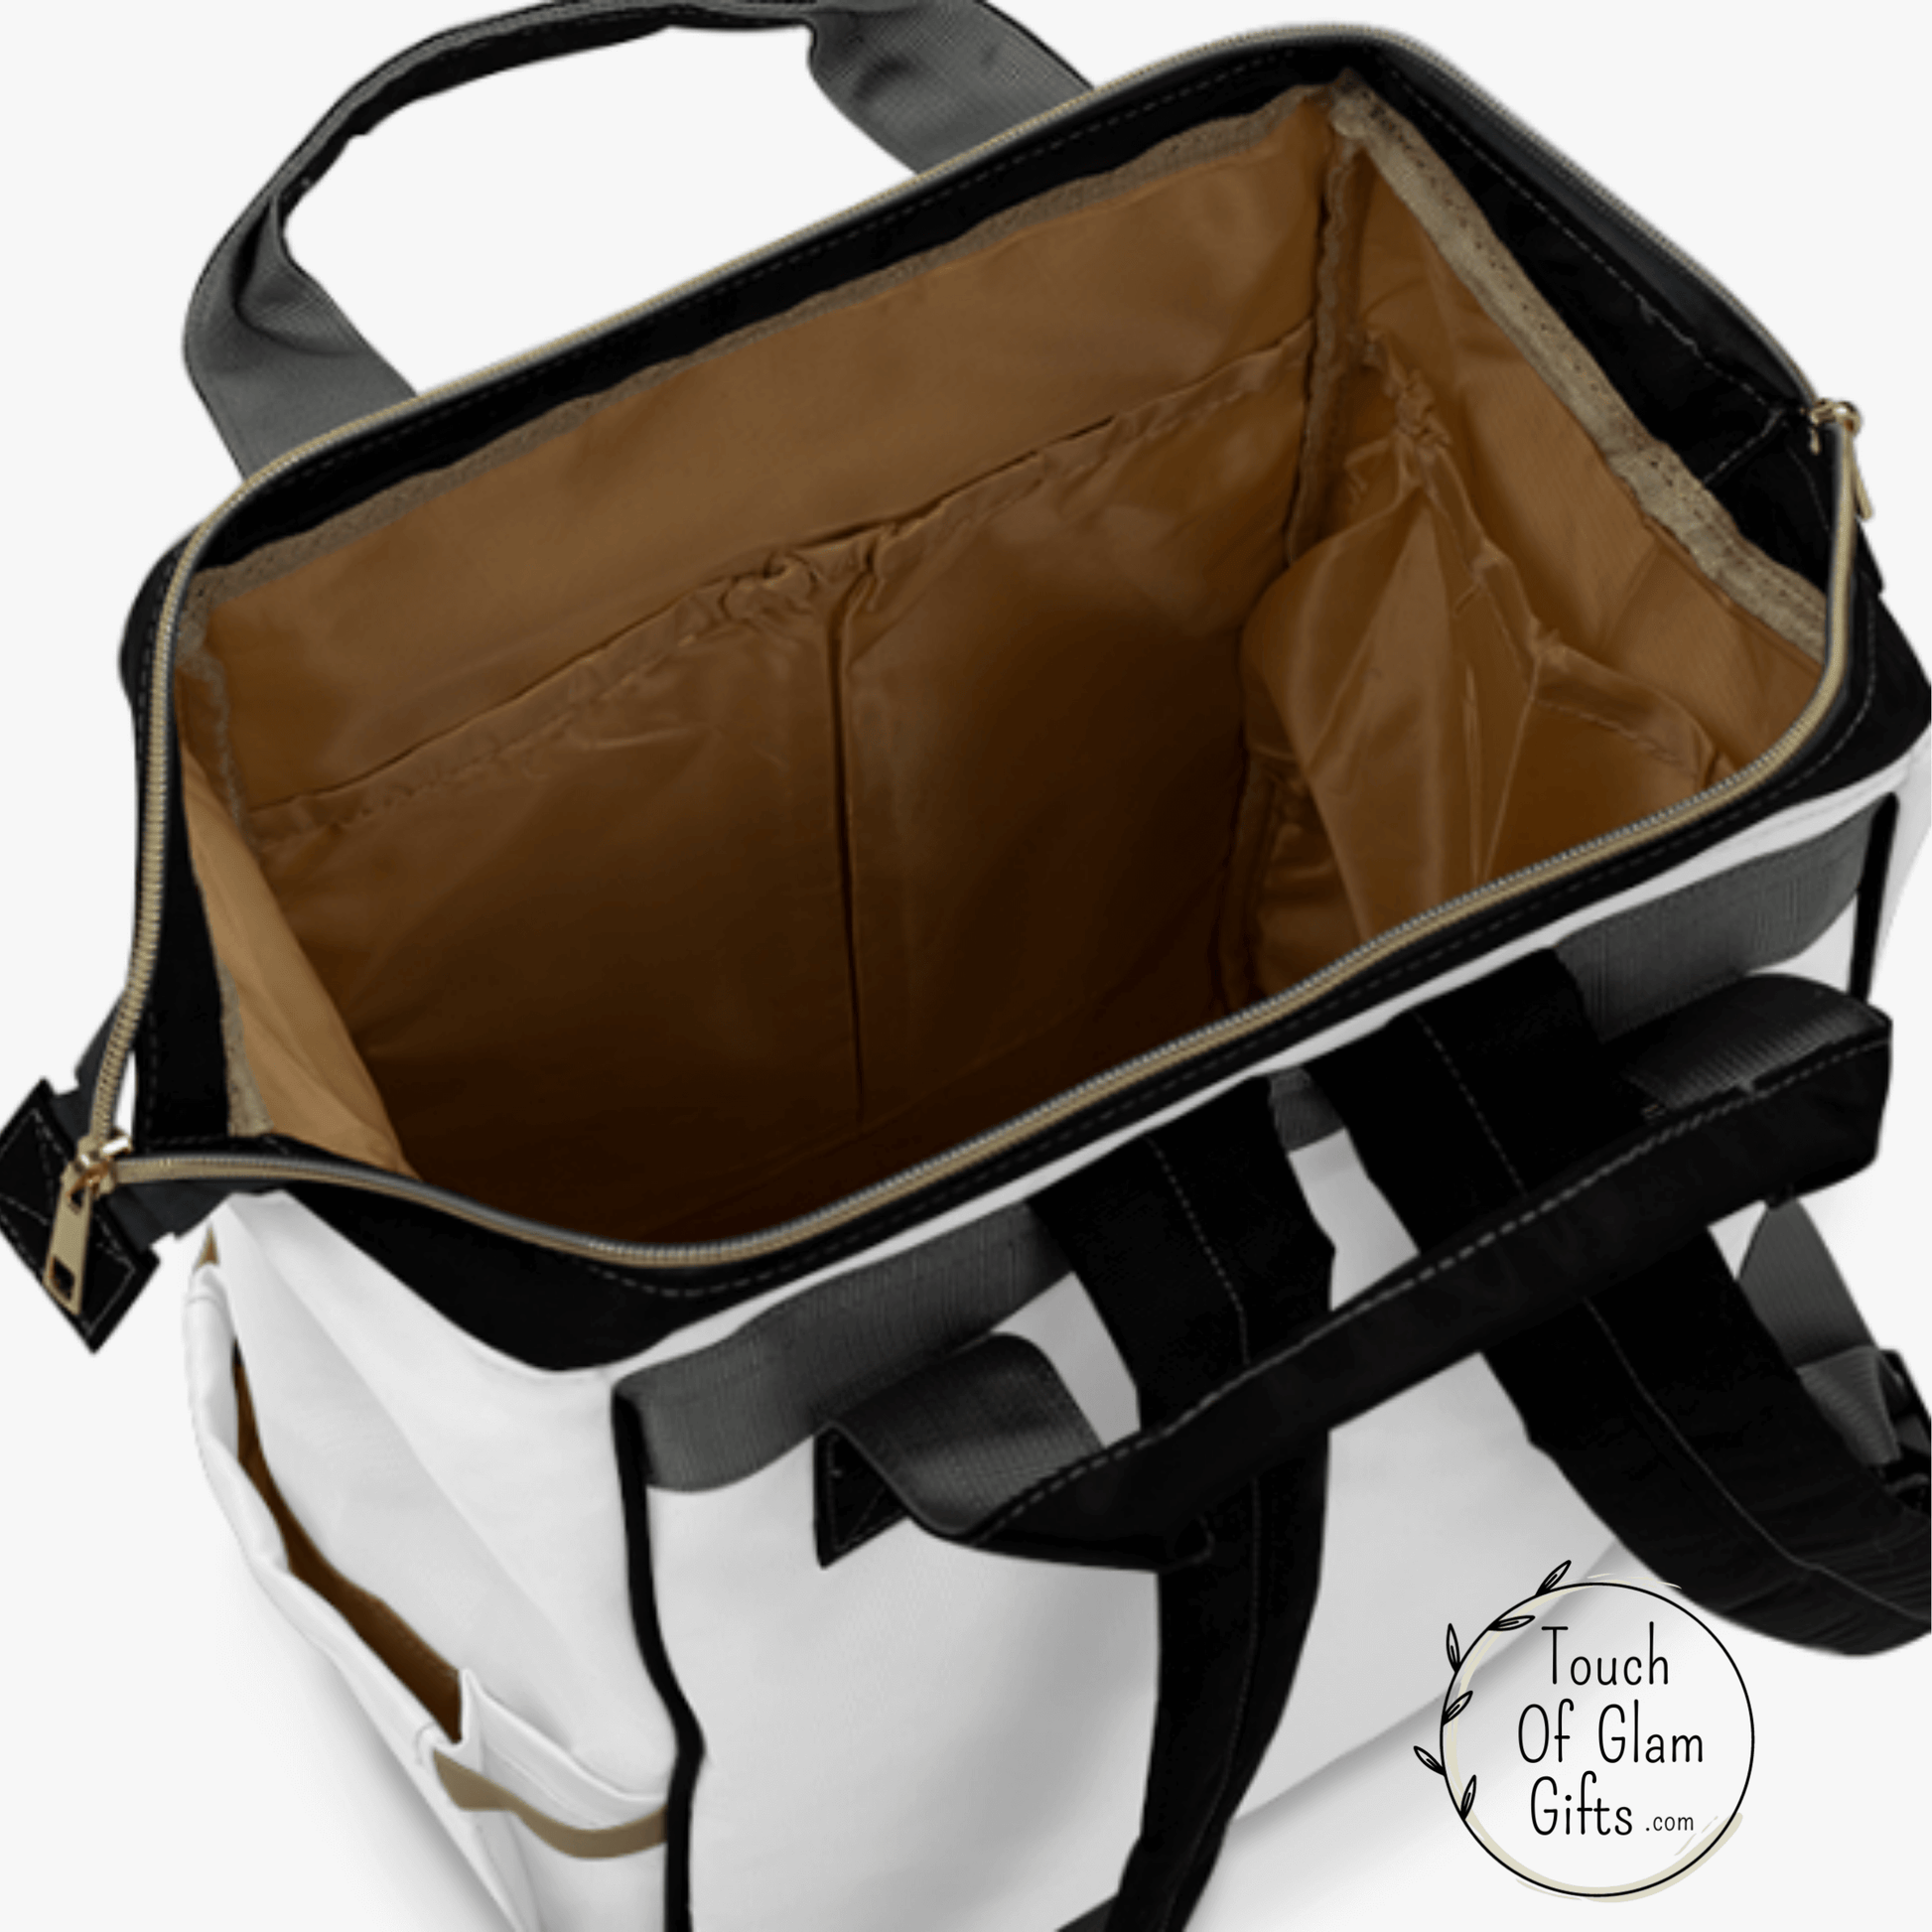 The inside of the cowhide backpack opens wide with a zippered compartment and the bag stands up on its own when opened.